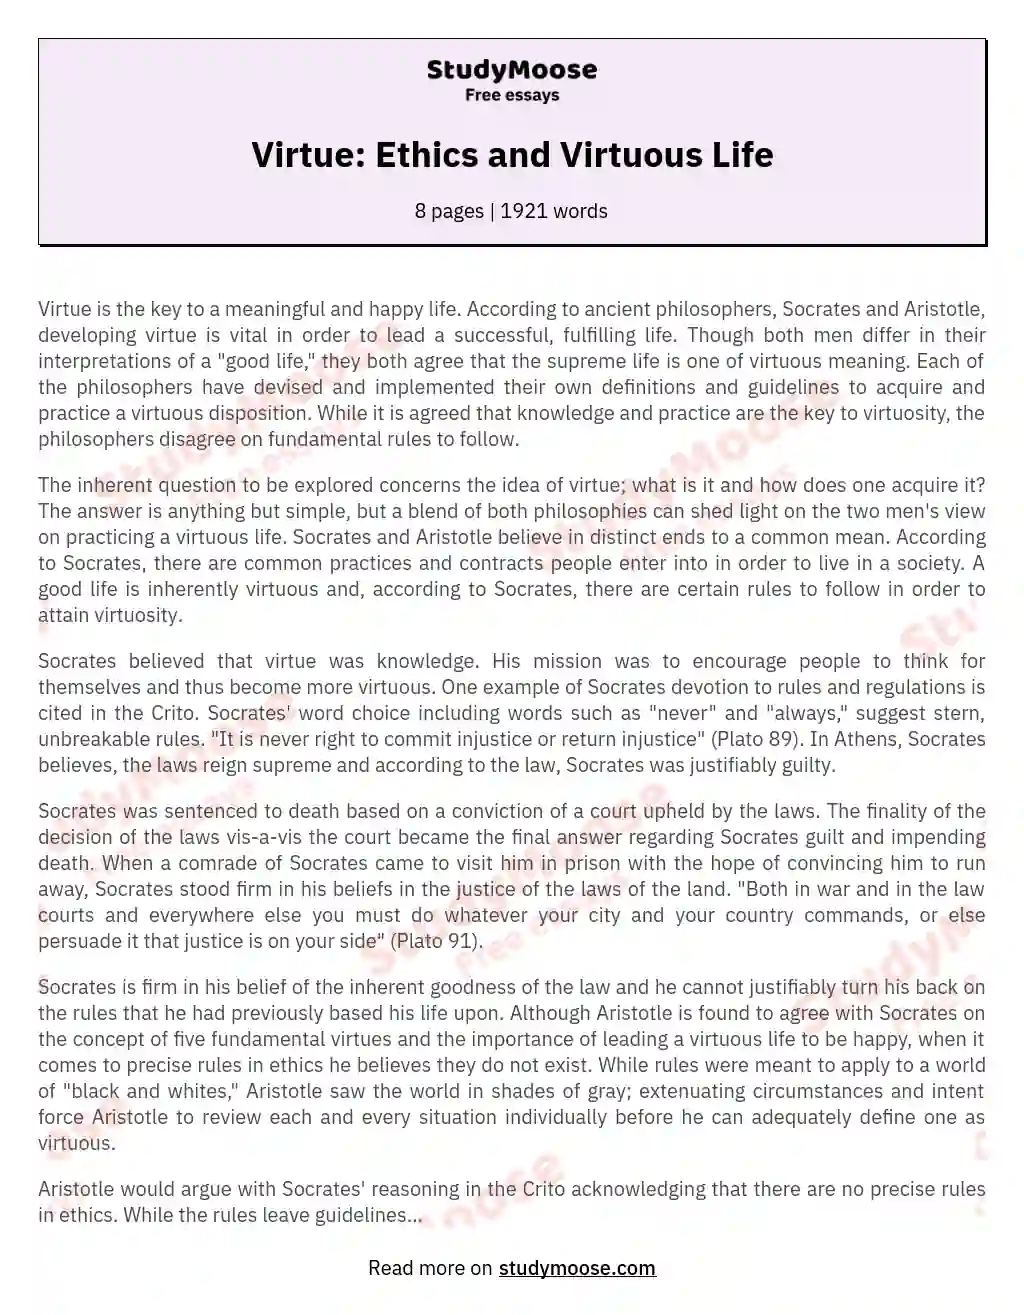 Virtue: Ethics and Virtuous Life essay